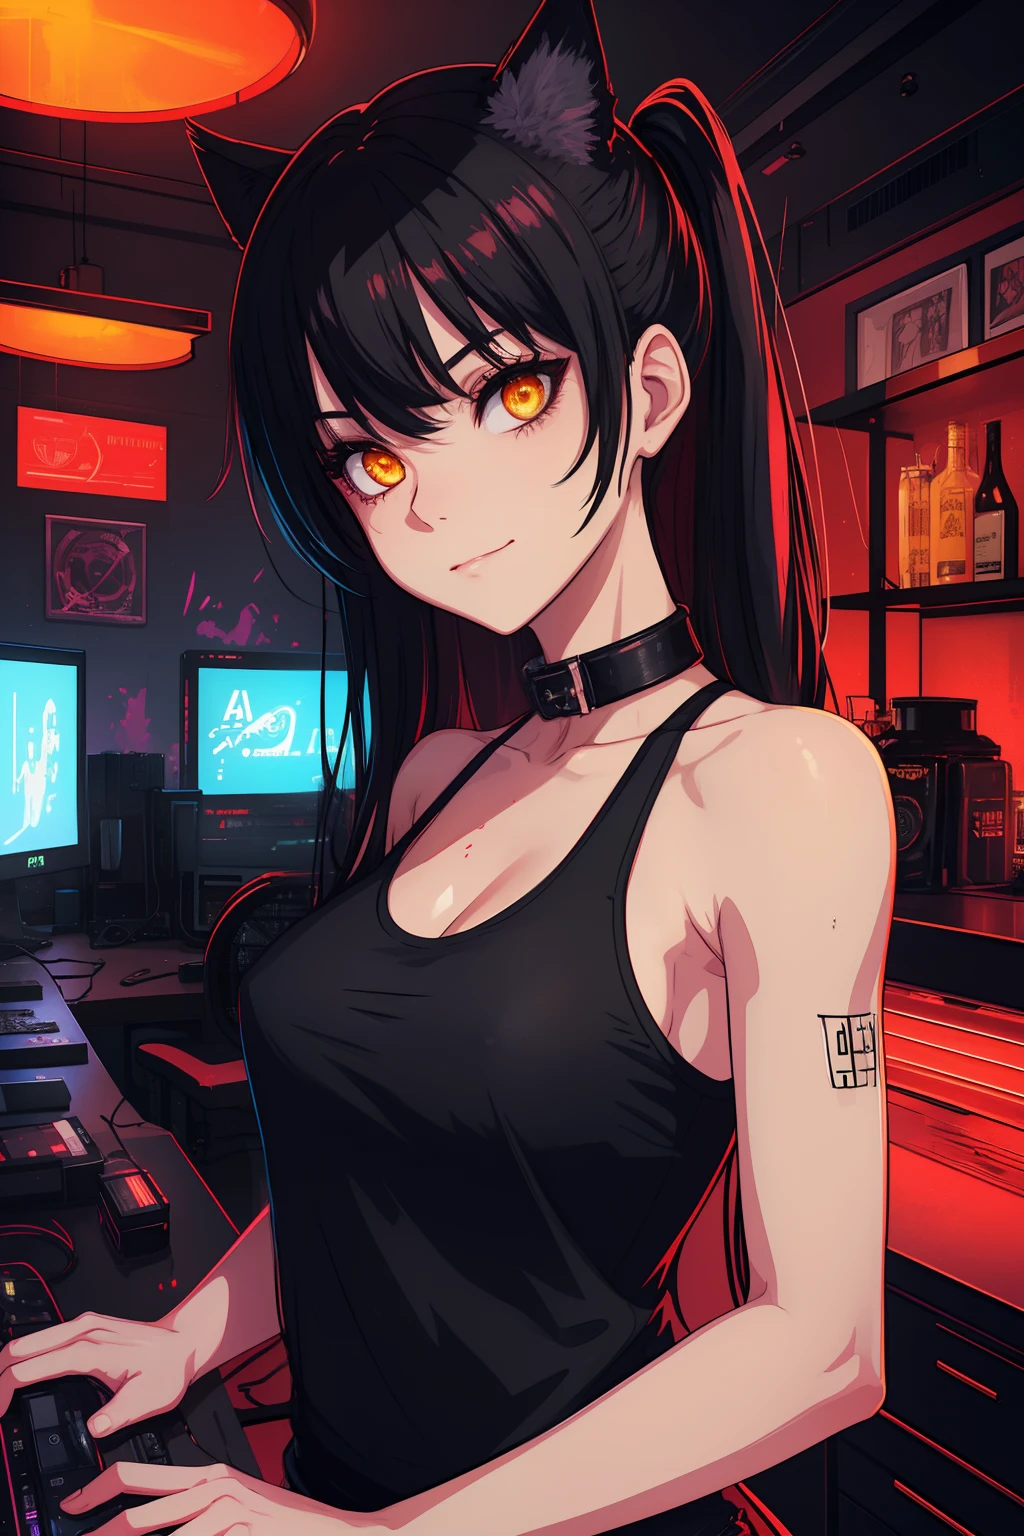 (((Portrait))), (NSFW, slim body), (best quality, 4k, 8k, high-res, ultra-detailed, anime style, paste, warm), catgirl, black hair, yellow glowing eyes, looking at viewer, smug, slightly smiling, goth makeup, collar, synthwave interior,l, vaporwave interior, red lightning, red interior aesthetic, red light, dark red lights, black tank top, black leggings, cyberpunk apartment